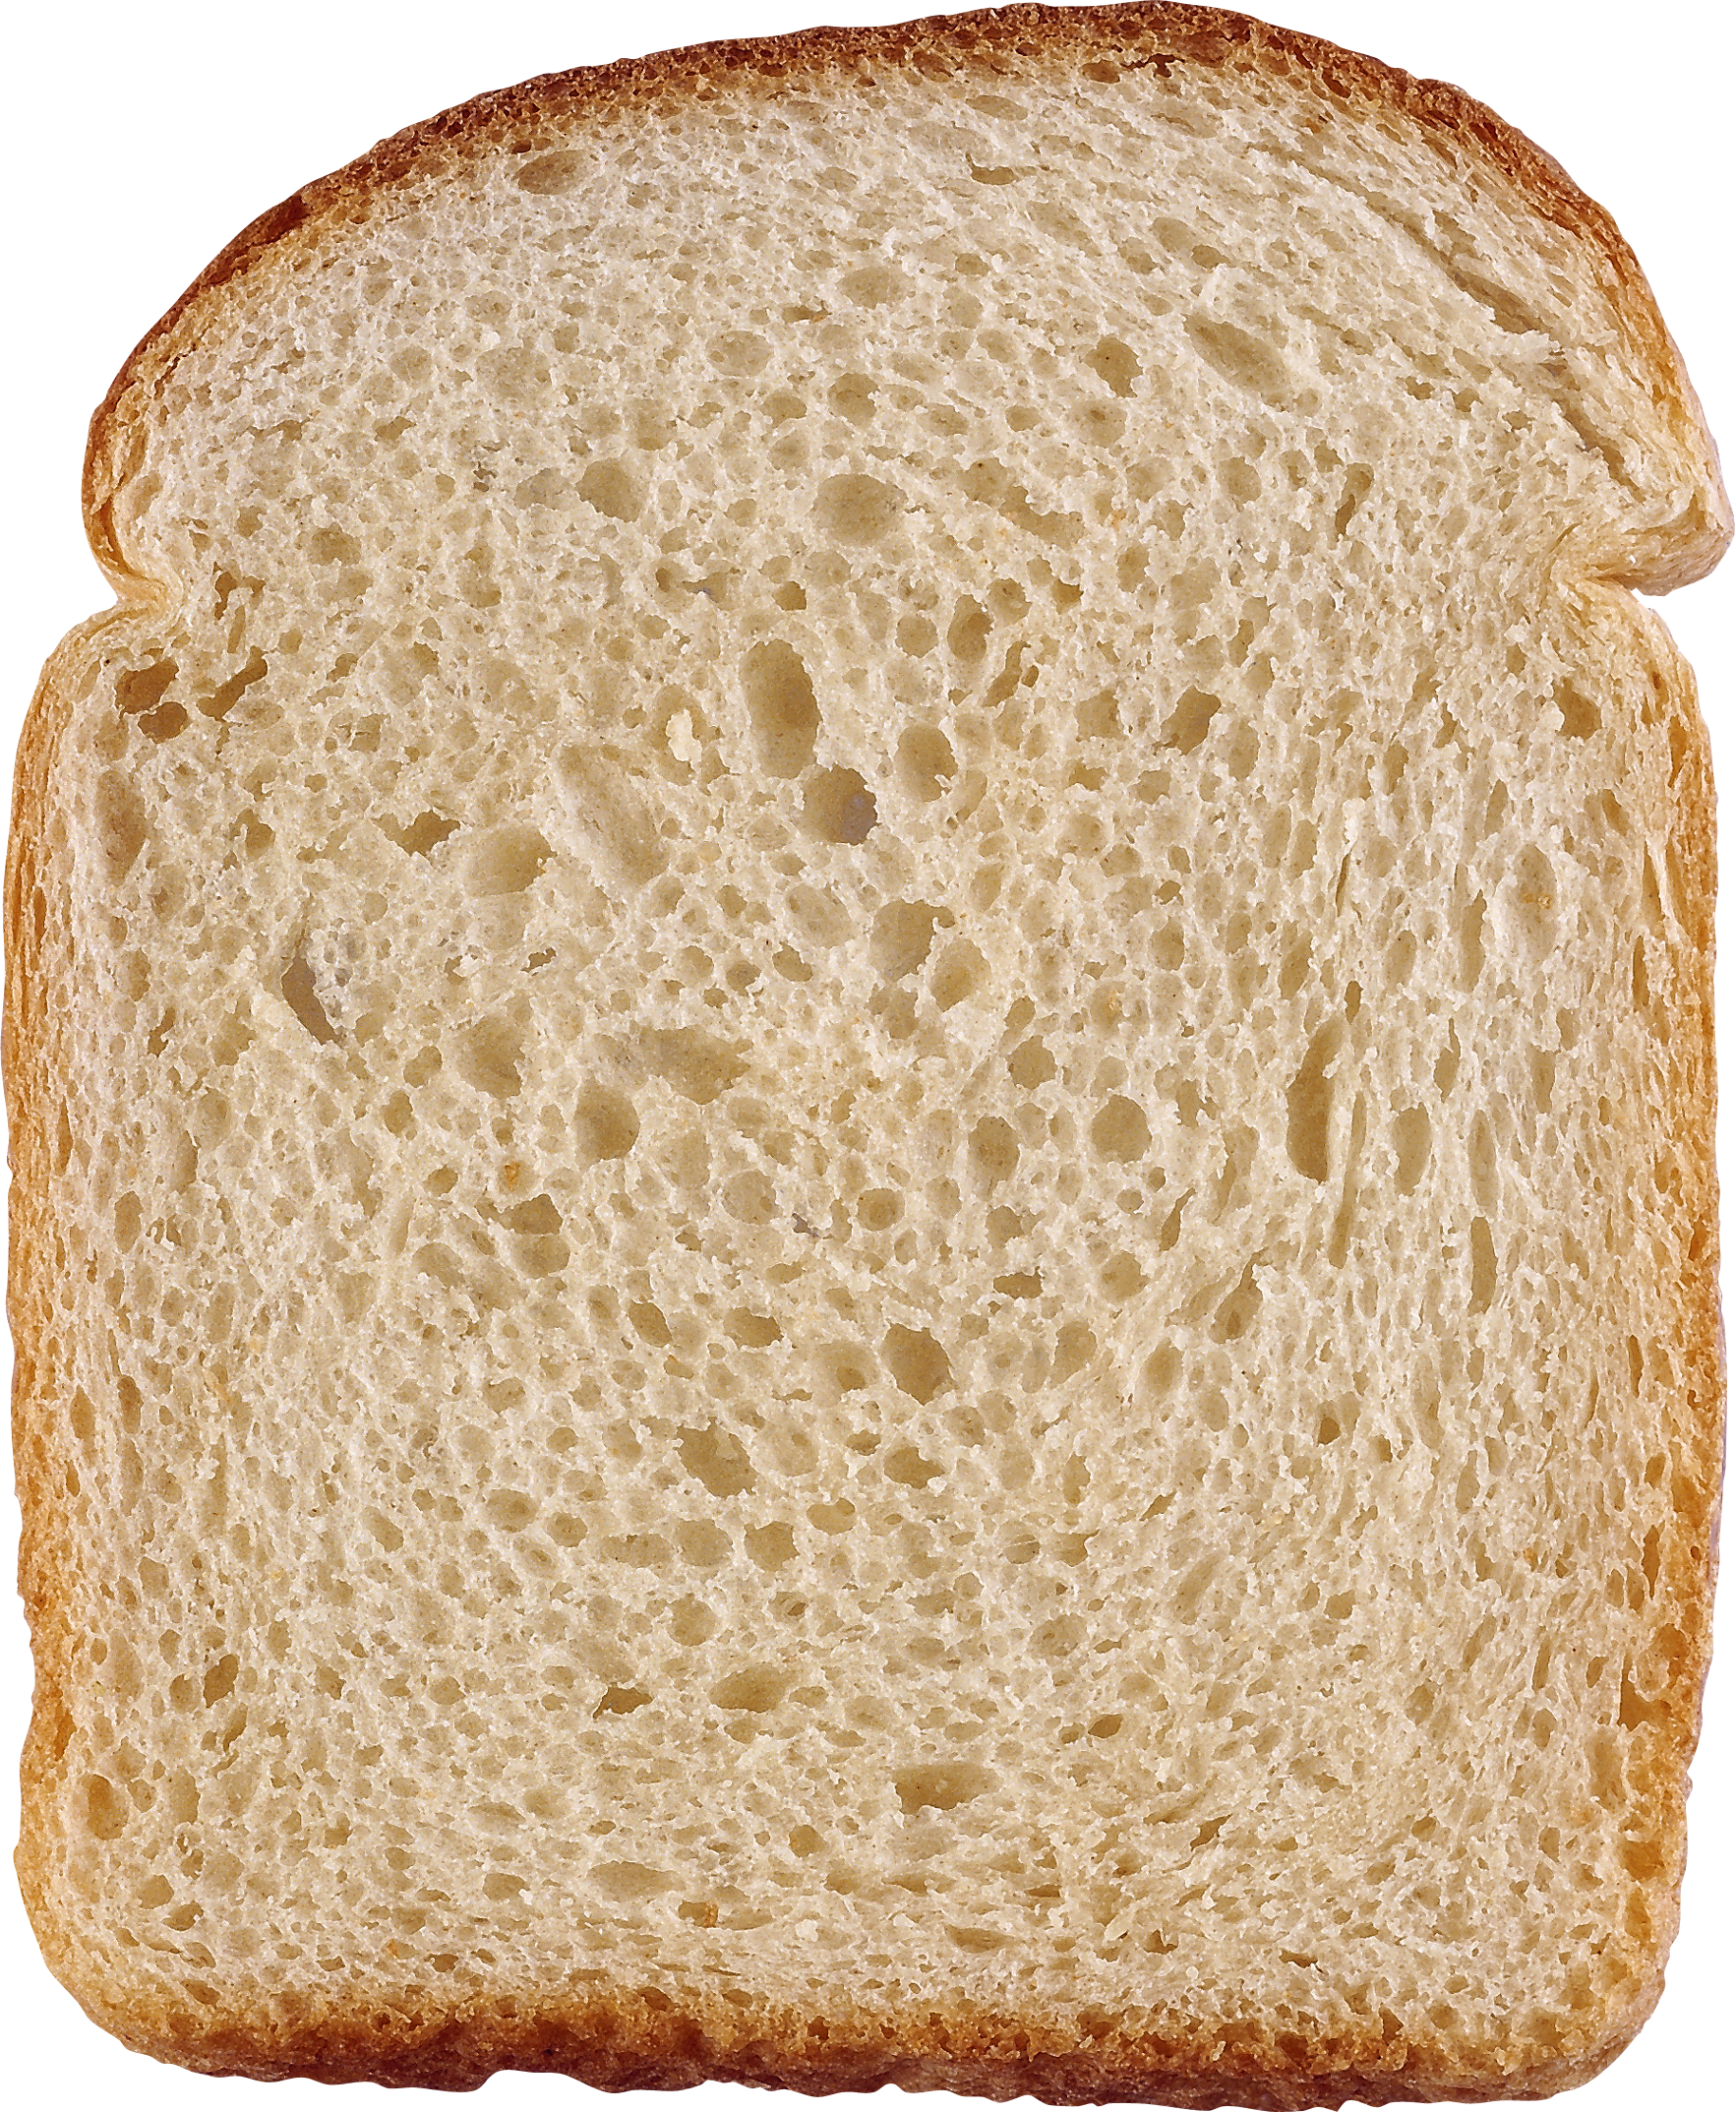 Bread png image free. Wheat clipart loaf